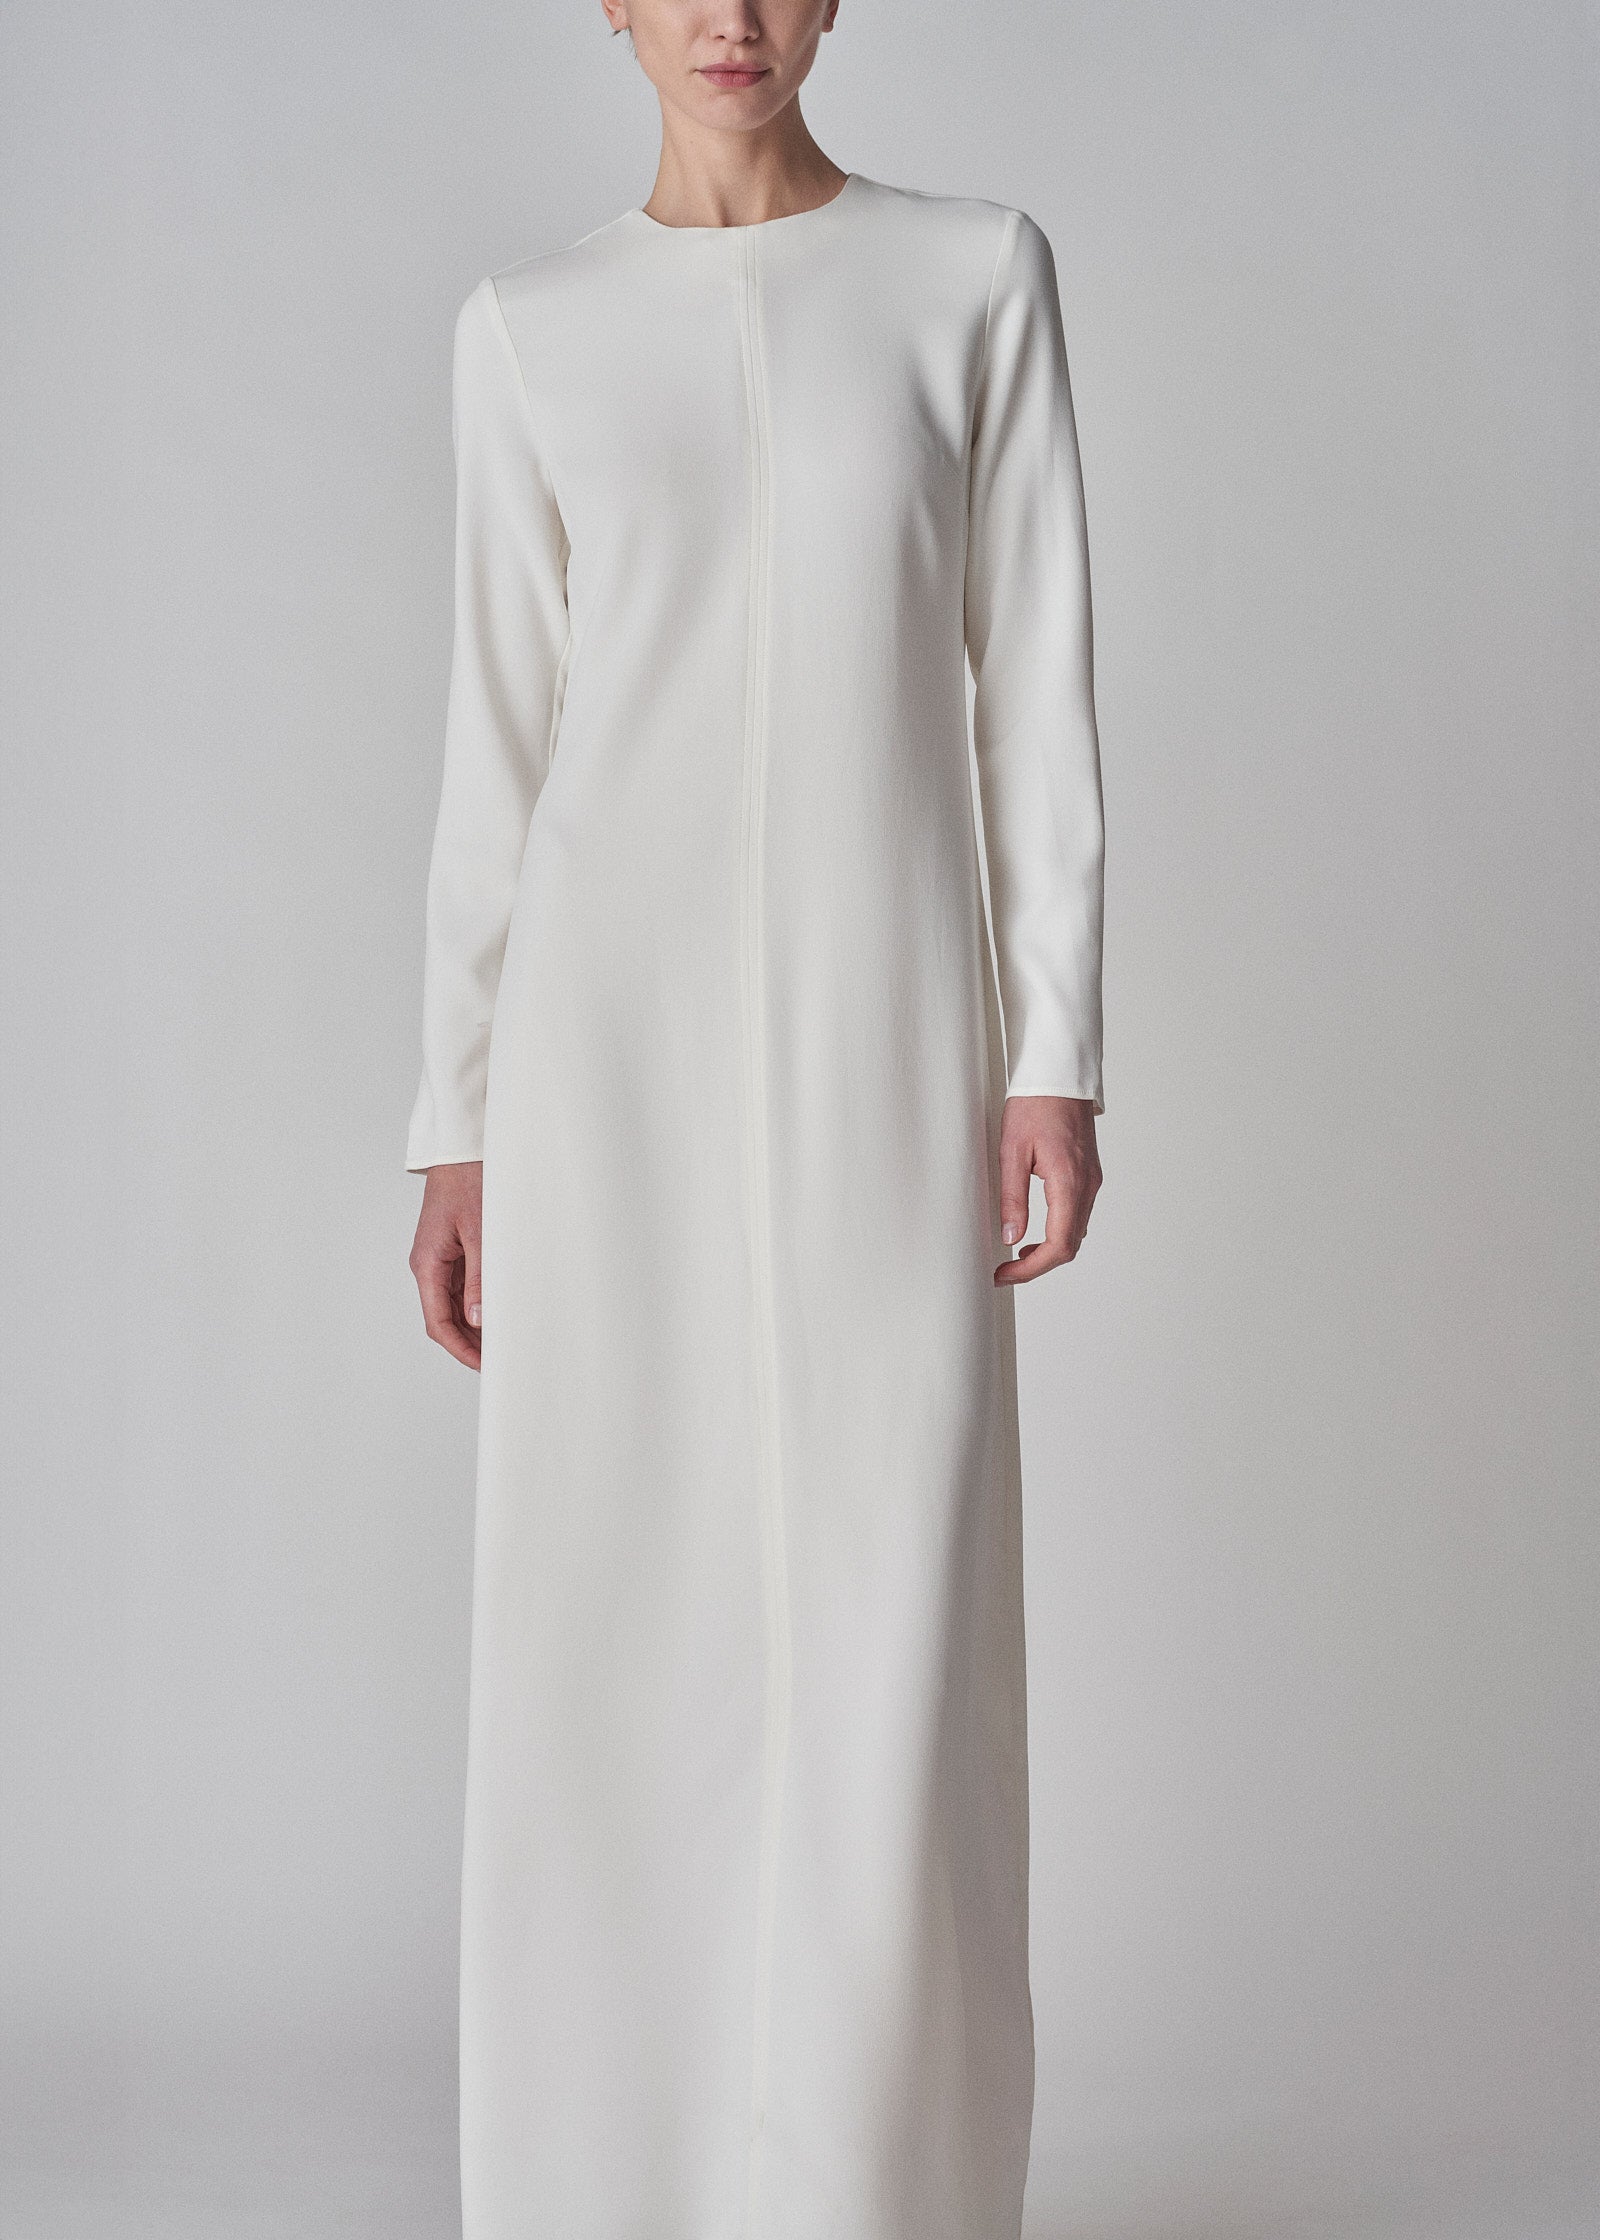 Long Sleeve Column Dress in Viscose Crepe - Ivory - CO Collections